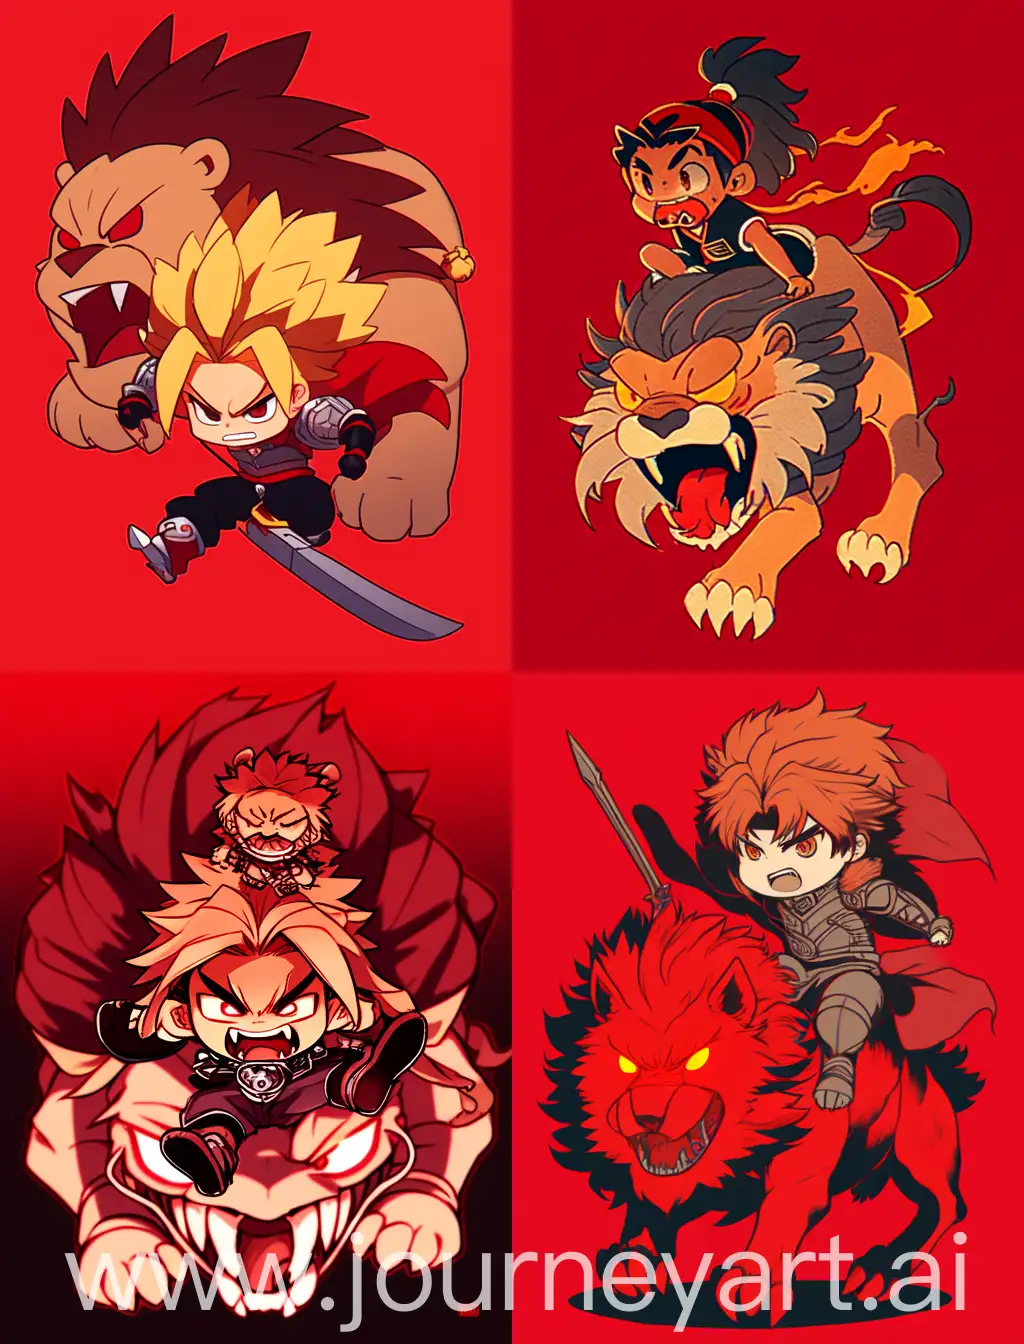 angry chibi anime guy riding a lion, cartoon anime style, with strong lines, with red solid background